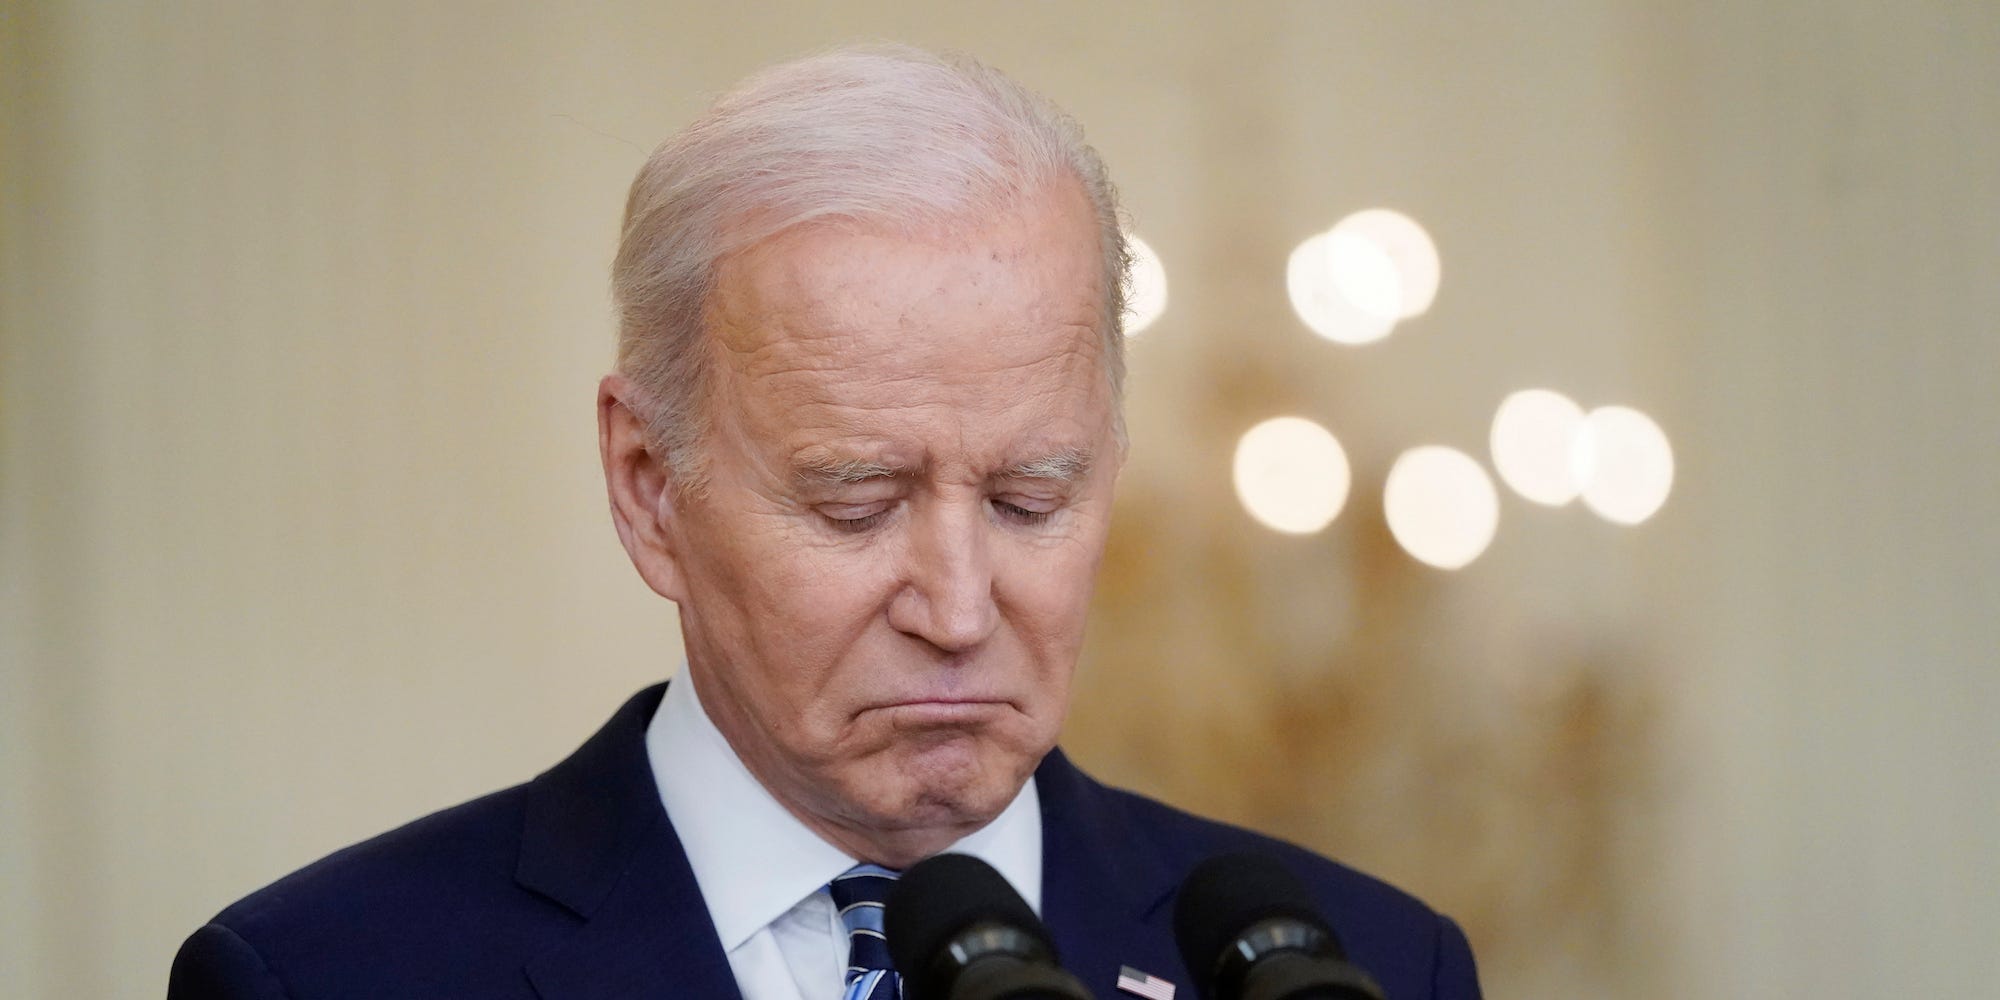 President Joe Biden listens to questions from reporters while speaking about the Russian invasion of Ukraine in the East Room of the White House, Thursday, Feb. 24, 2022, in Washington.